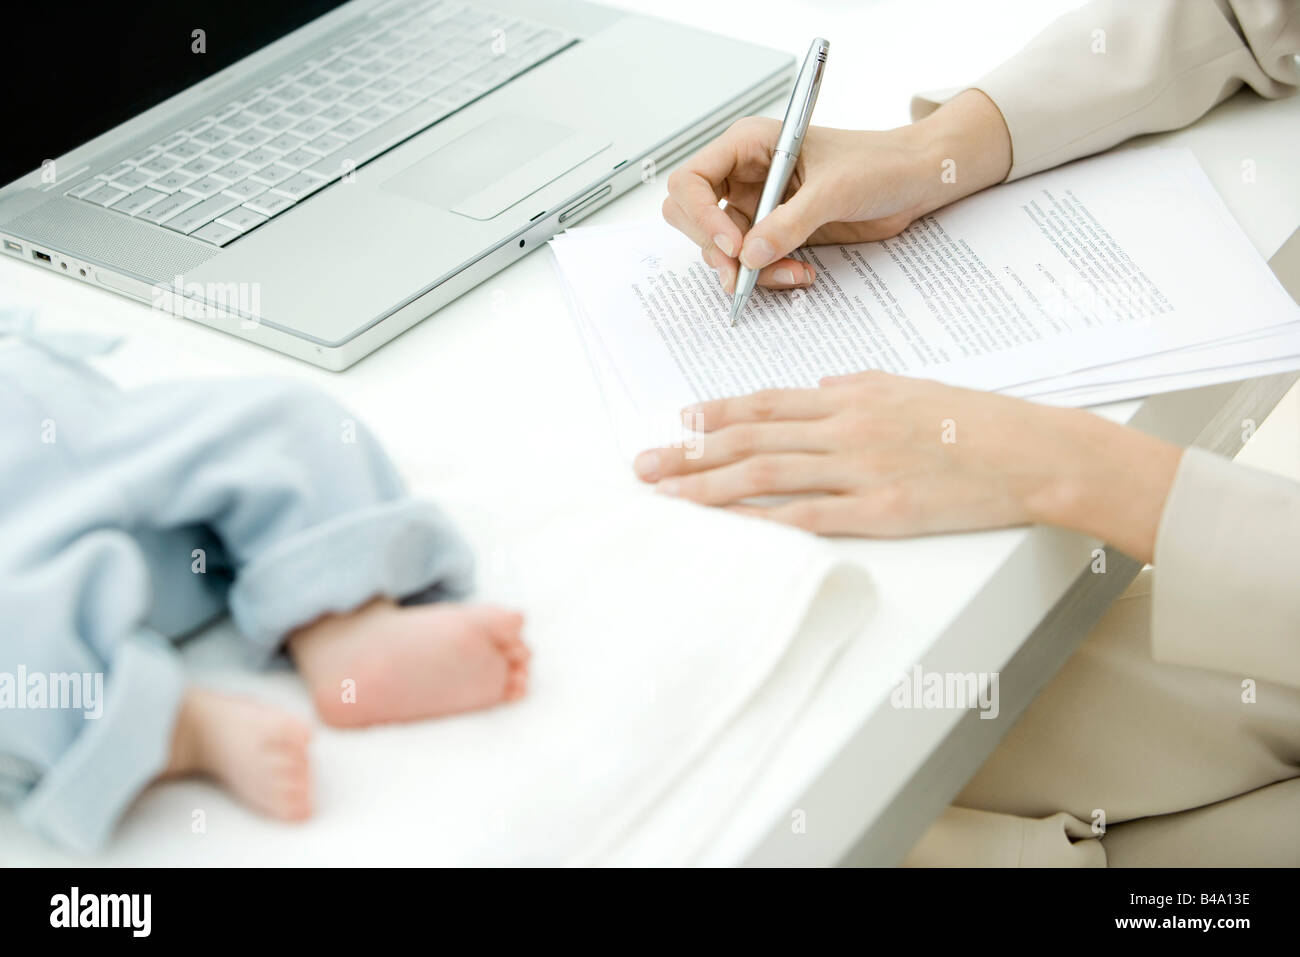 Woman editing document at desk, infant lying nearby, cropped view Stock Photo